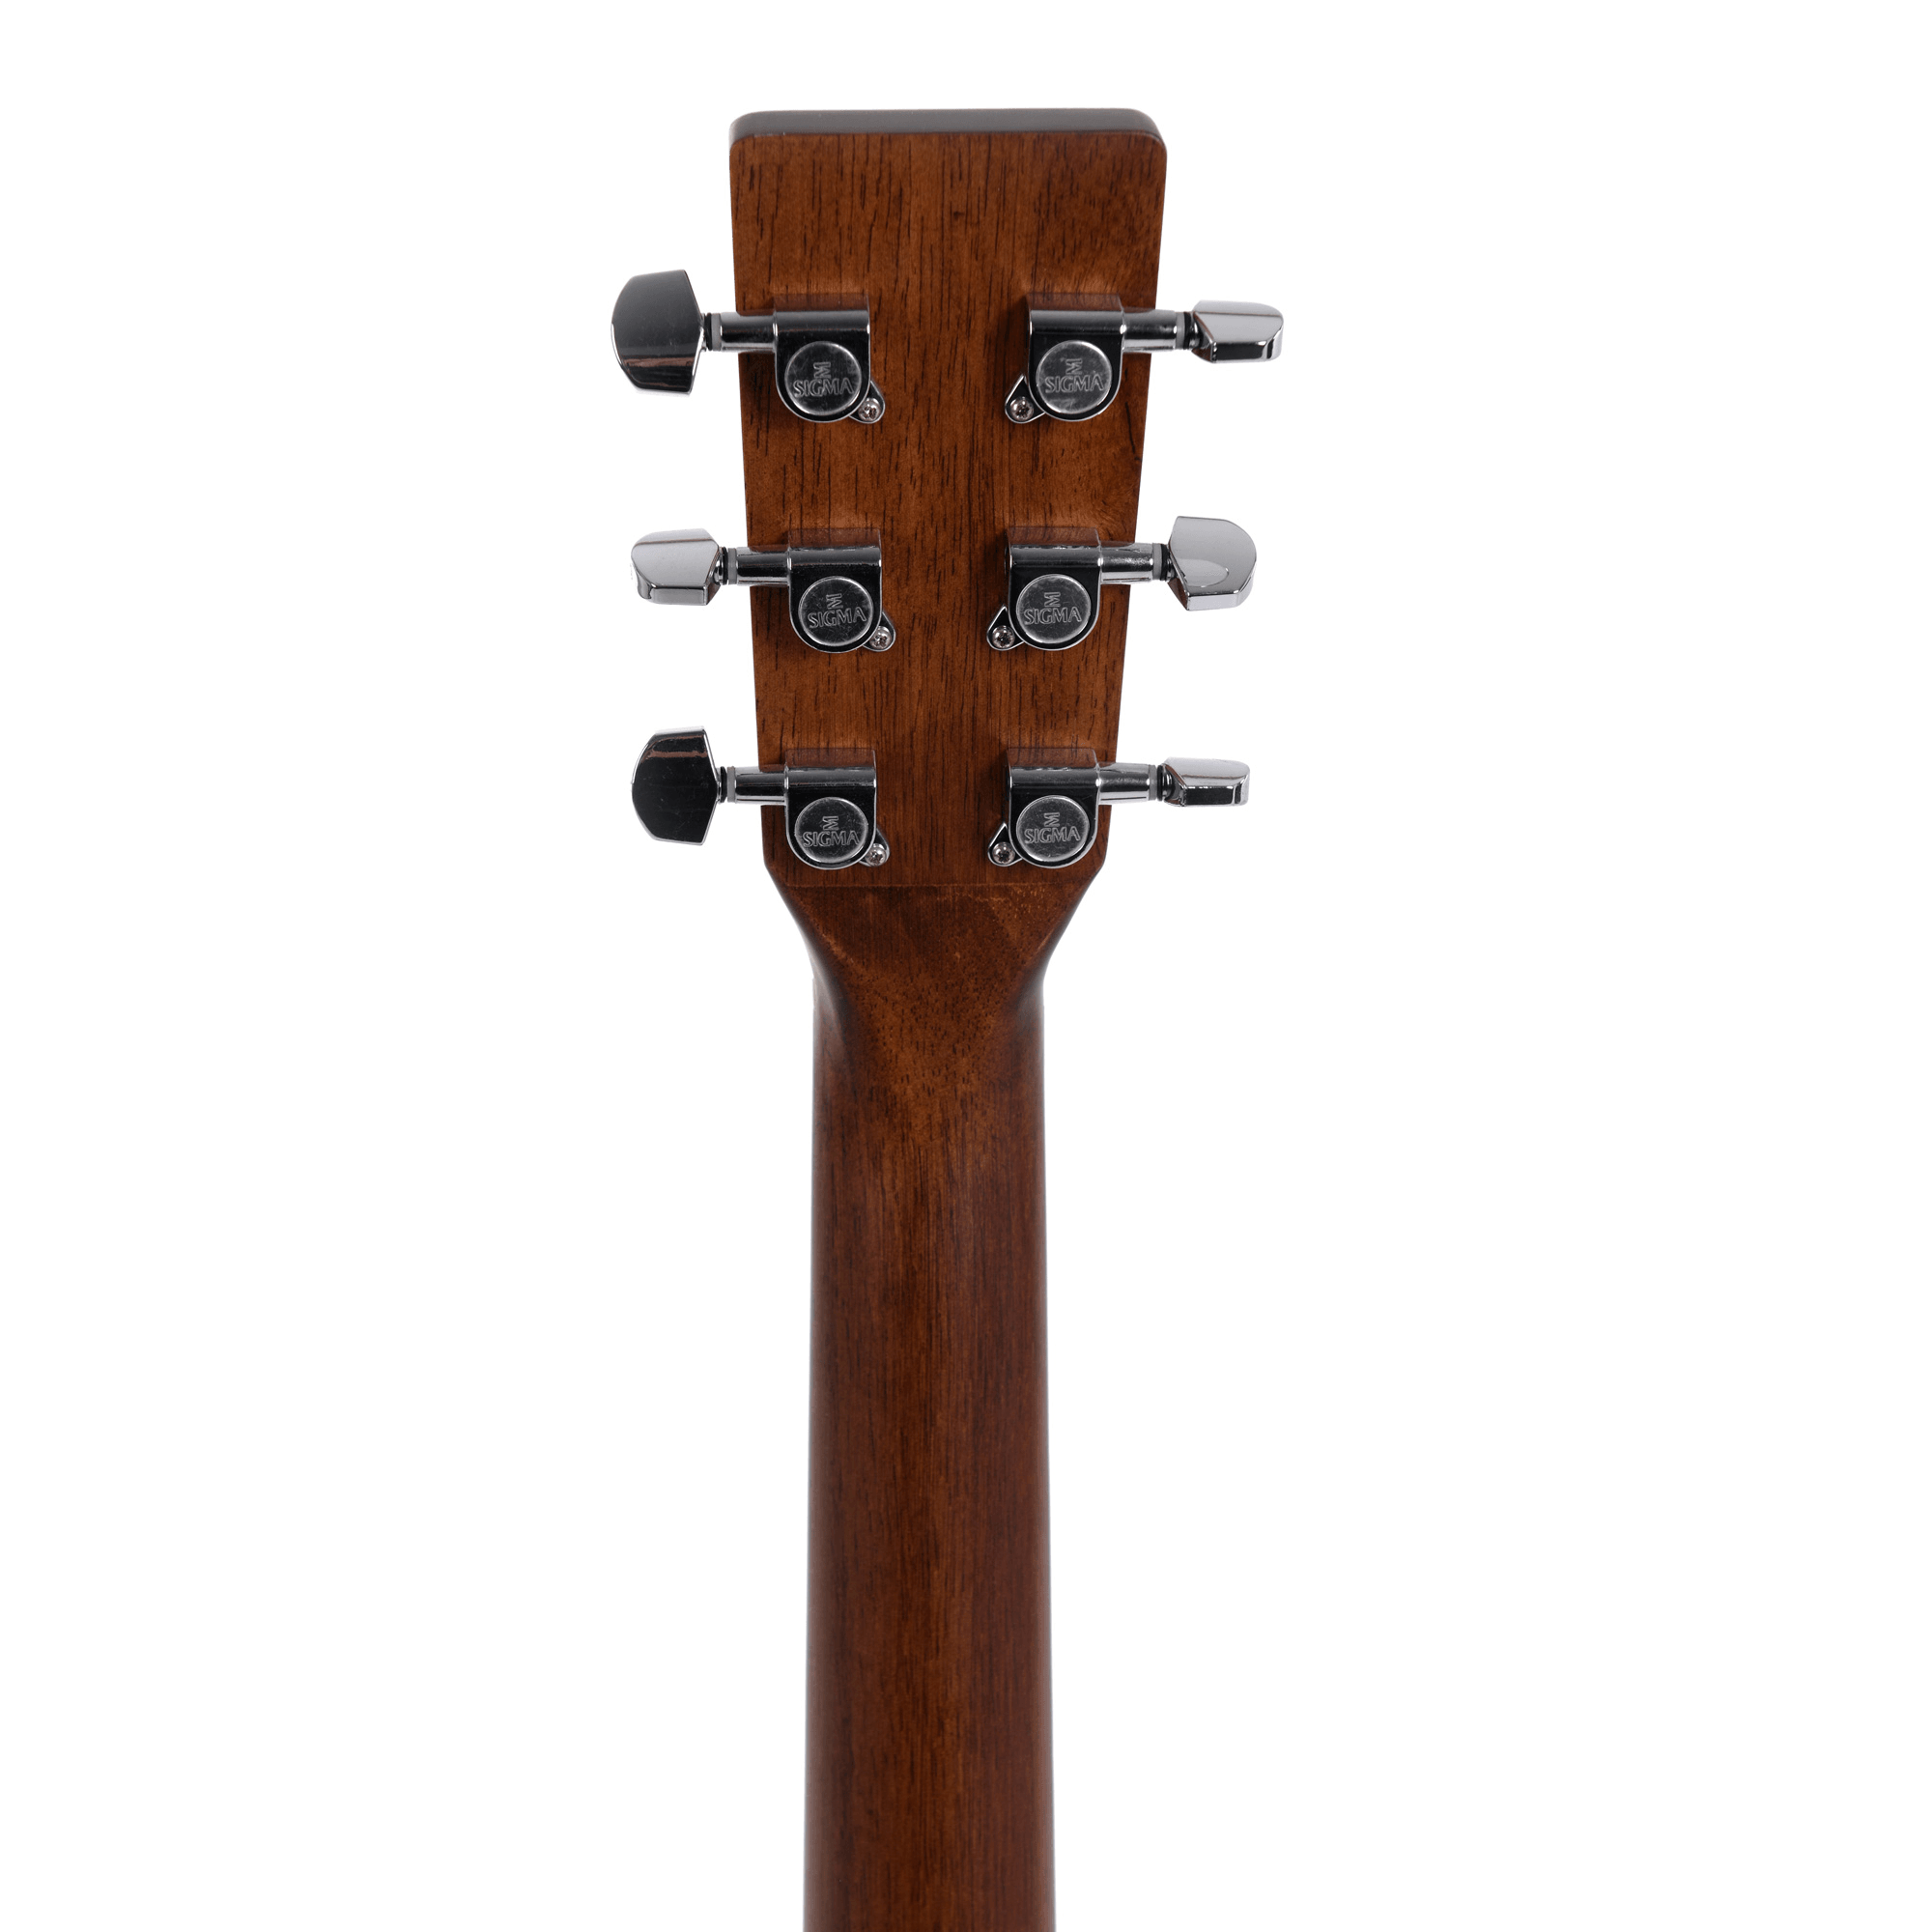 DME Dreadnought With Pickup - Guitars - Acoustic by Sigma at Muso's Stuff